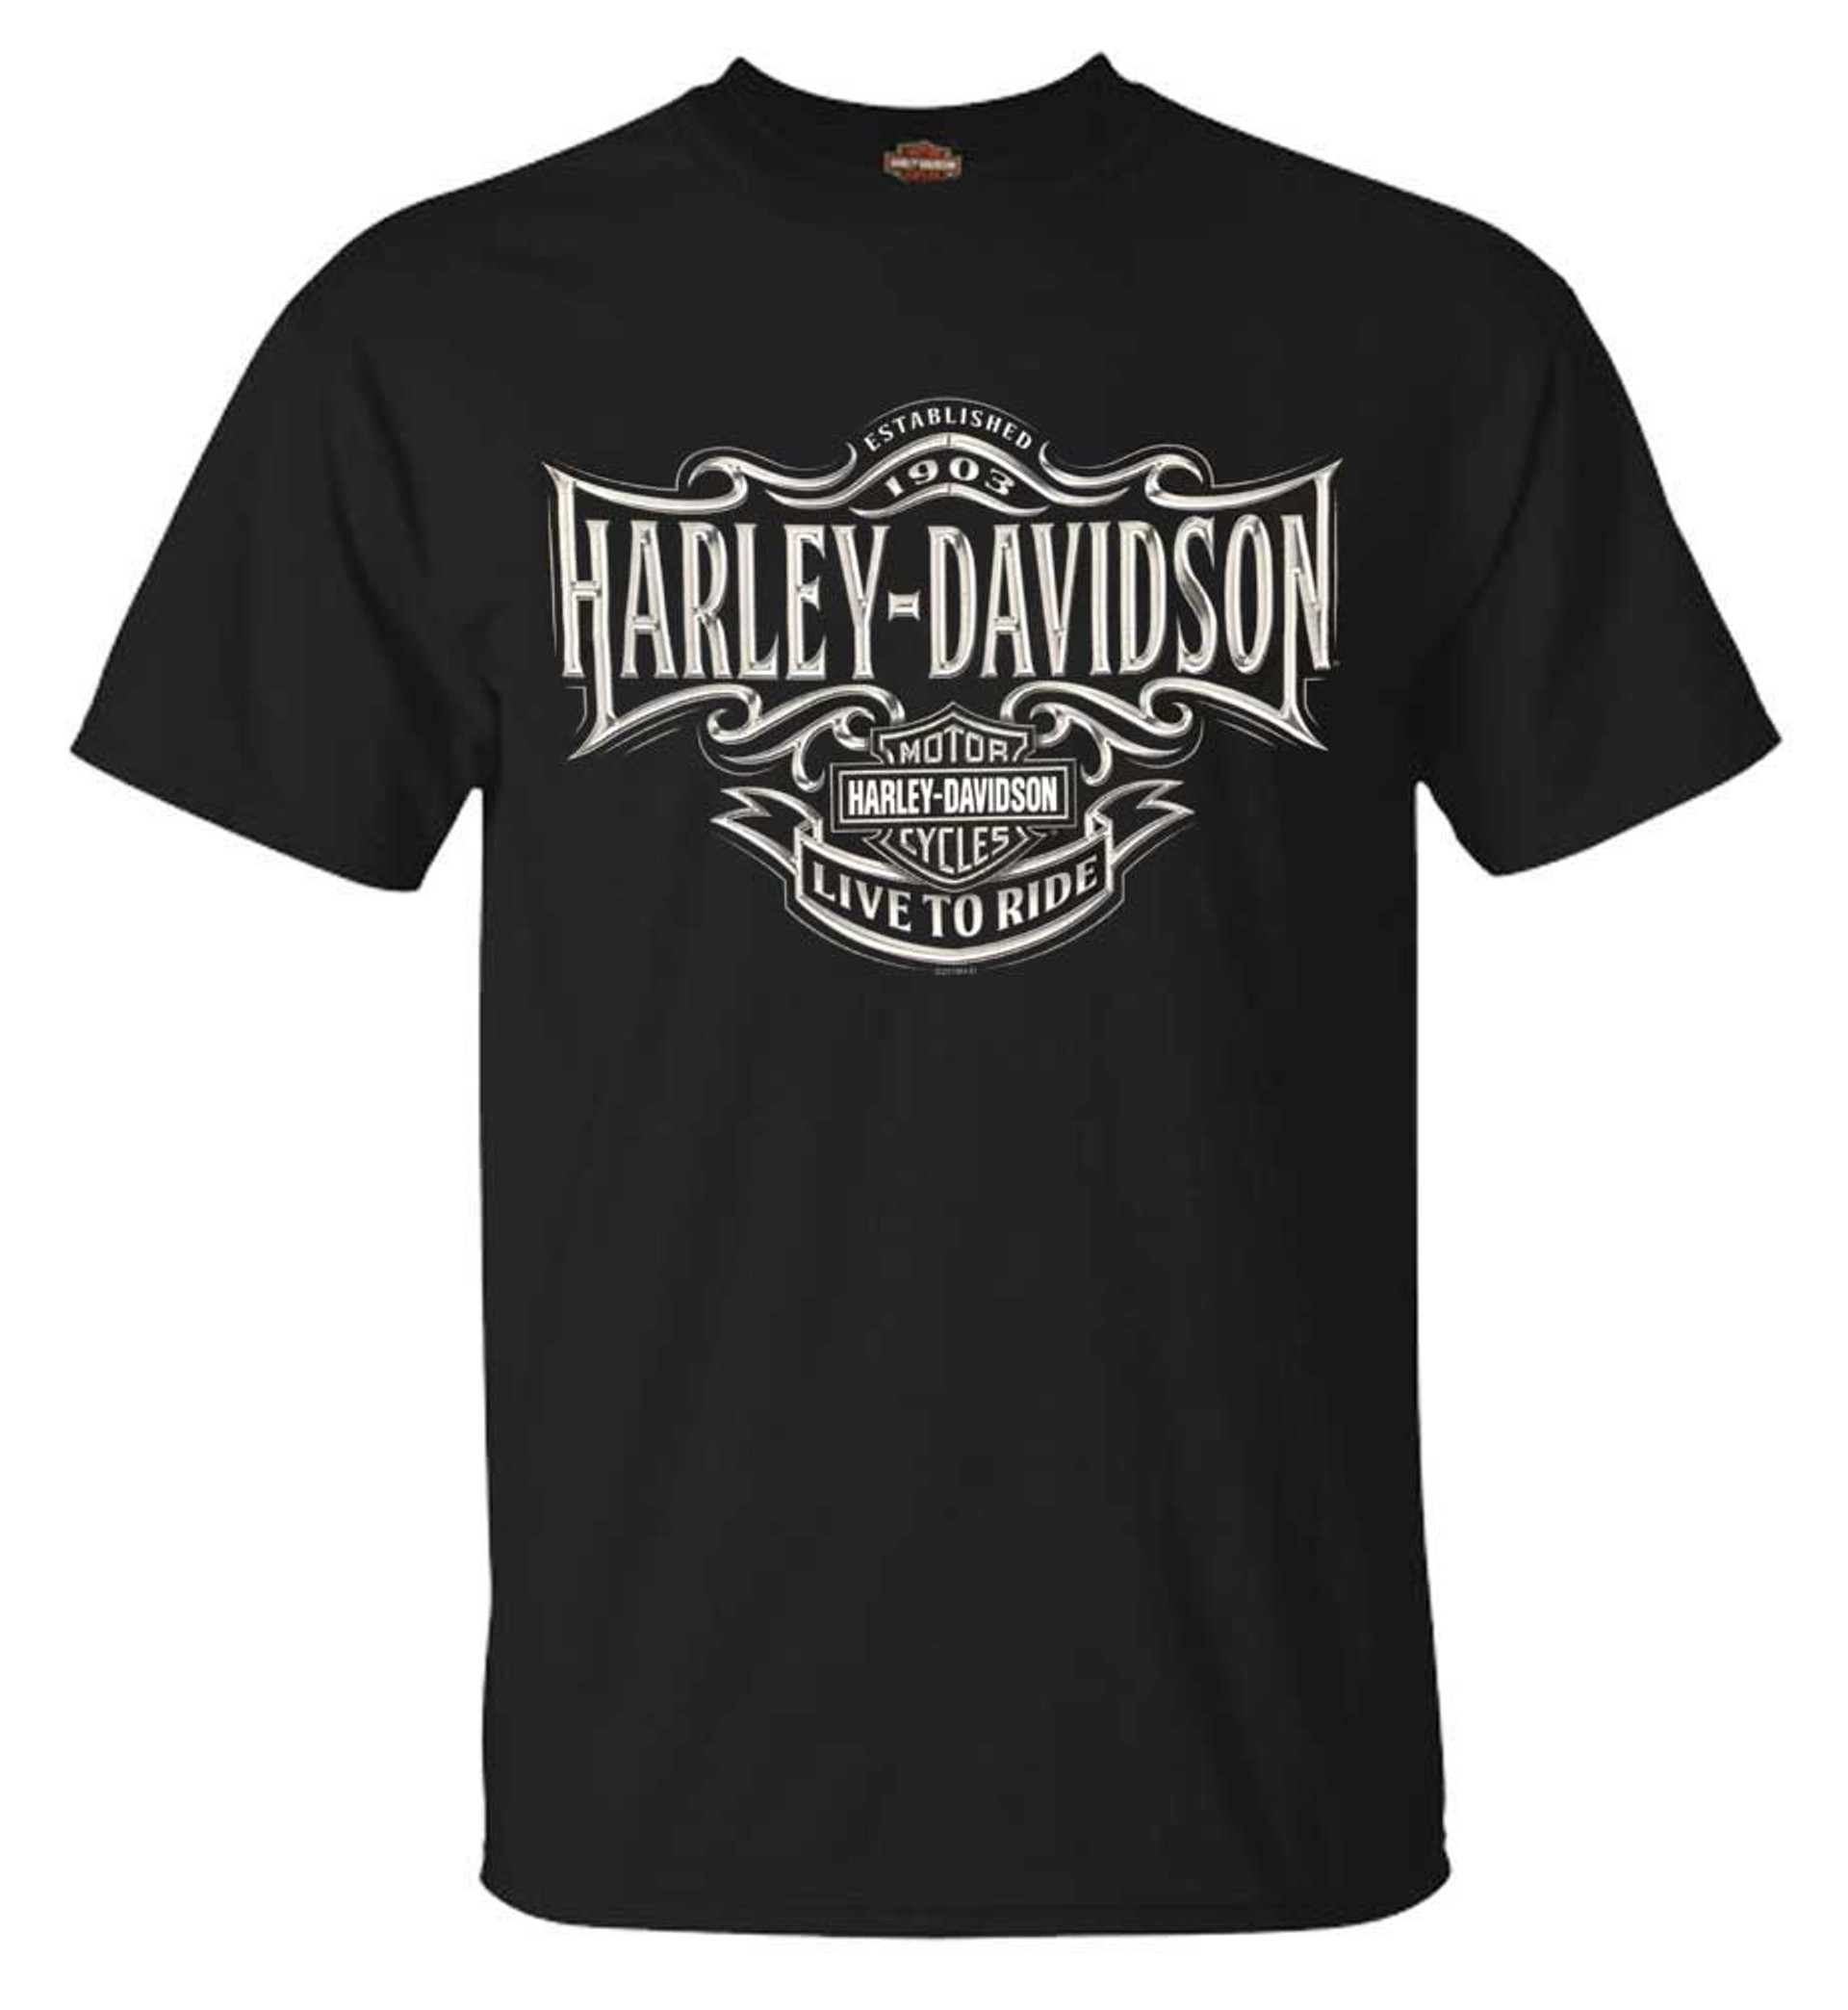 Harley Davidson® Mens Live To Ride H D Short Sleeve Cotton T Shirt Solid Black Wisconsin 